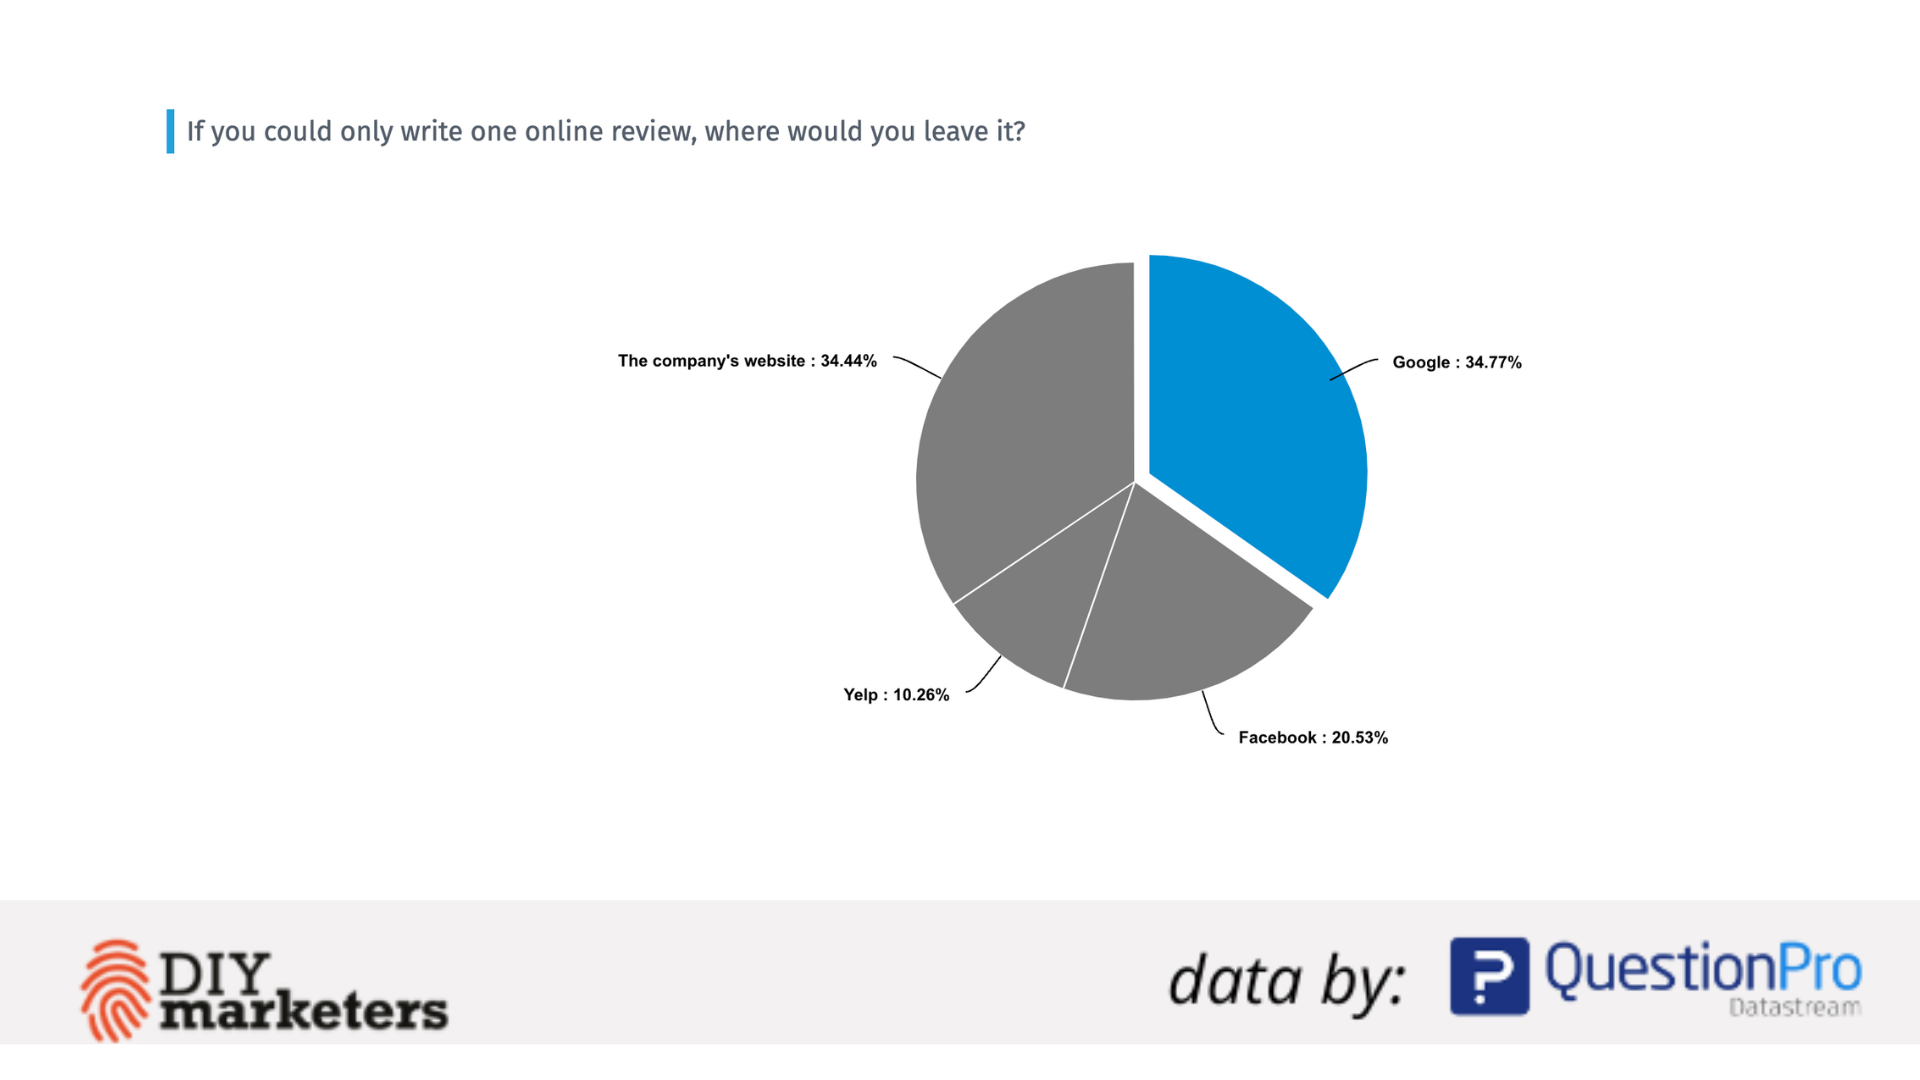 35% of consumers would leave an online review on Google (online reviews data)